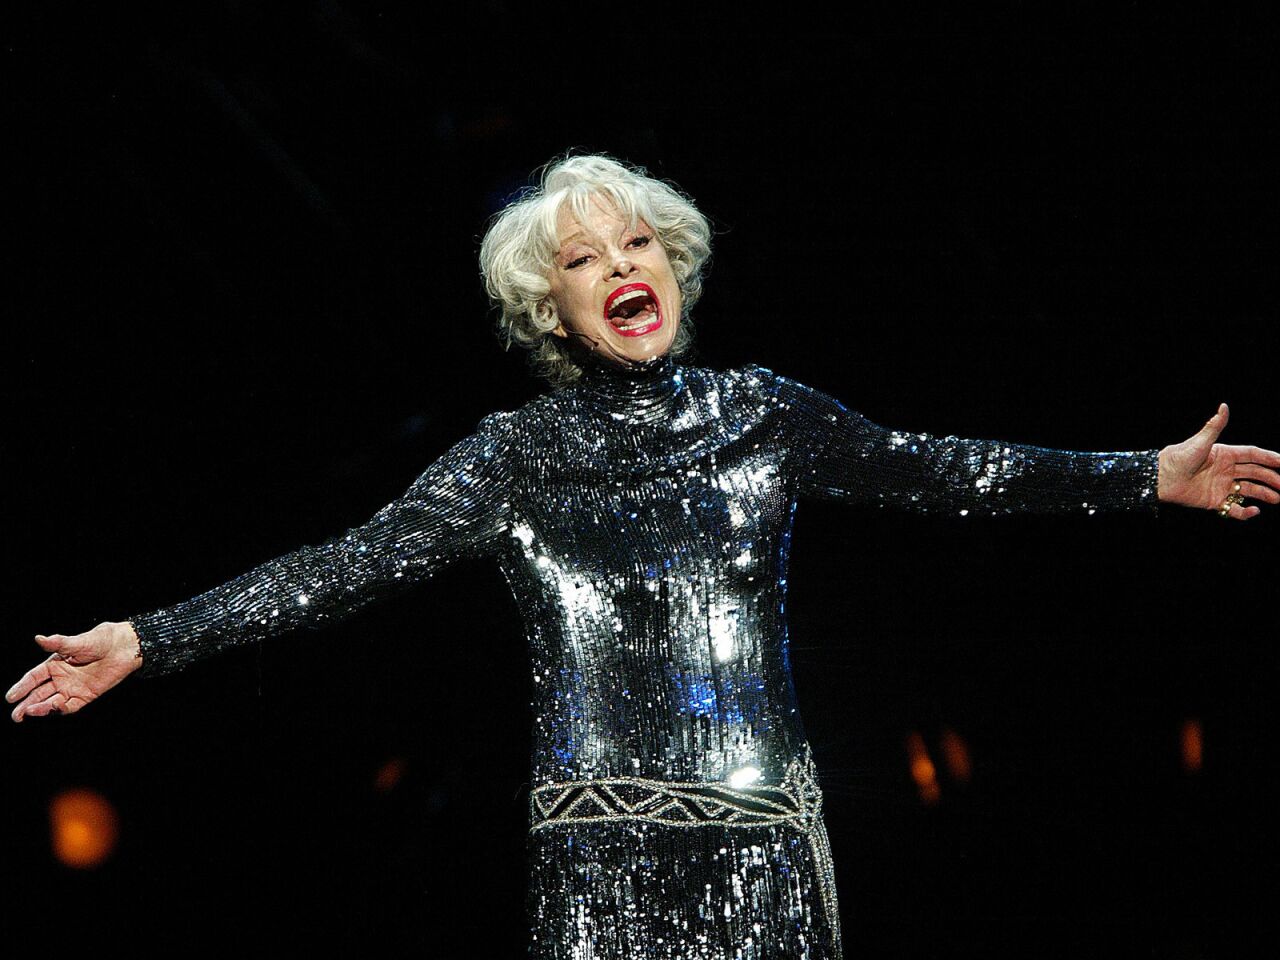 Carol Channing was a Broadway star best known for her enduring portrayal of the title character in the musical “Hello, Dolly!” A winner of three Tony Awards, including one for lifetime achievement, she appeared in the play at least 5,000 times. She was 97.